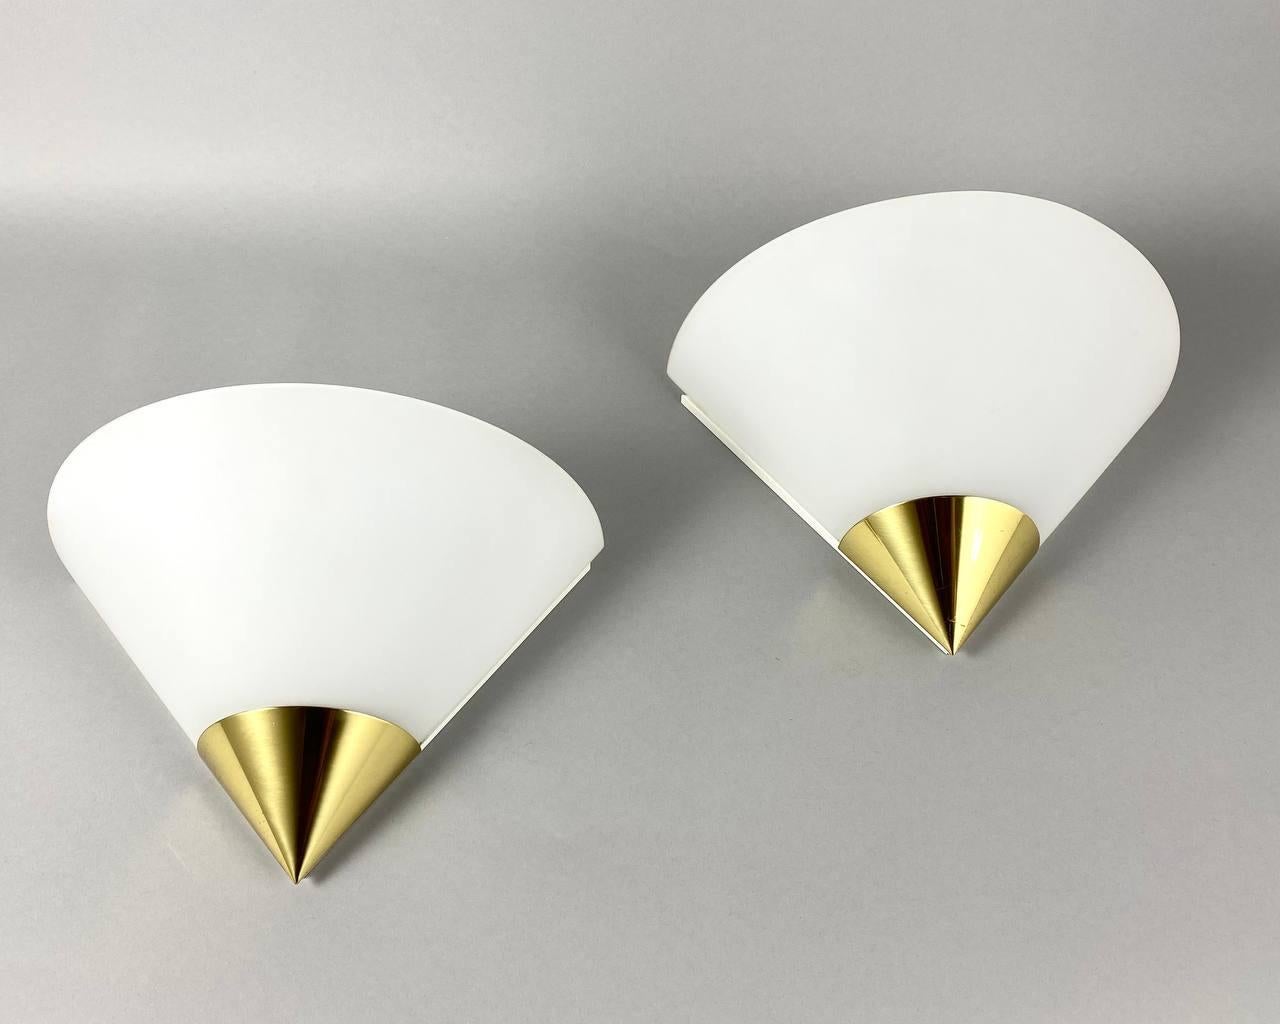 German Vintage Matte Glass and Gilt Brass Paired Wall Sconces by Glashutte Limburg